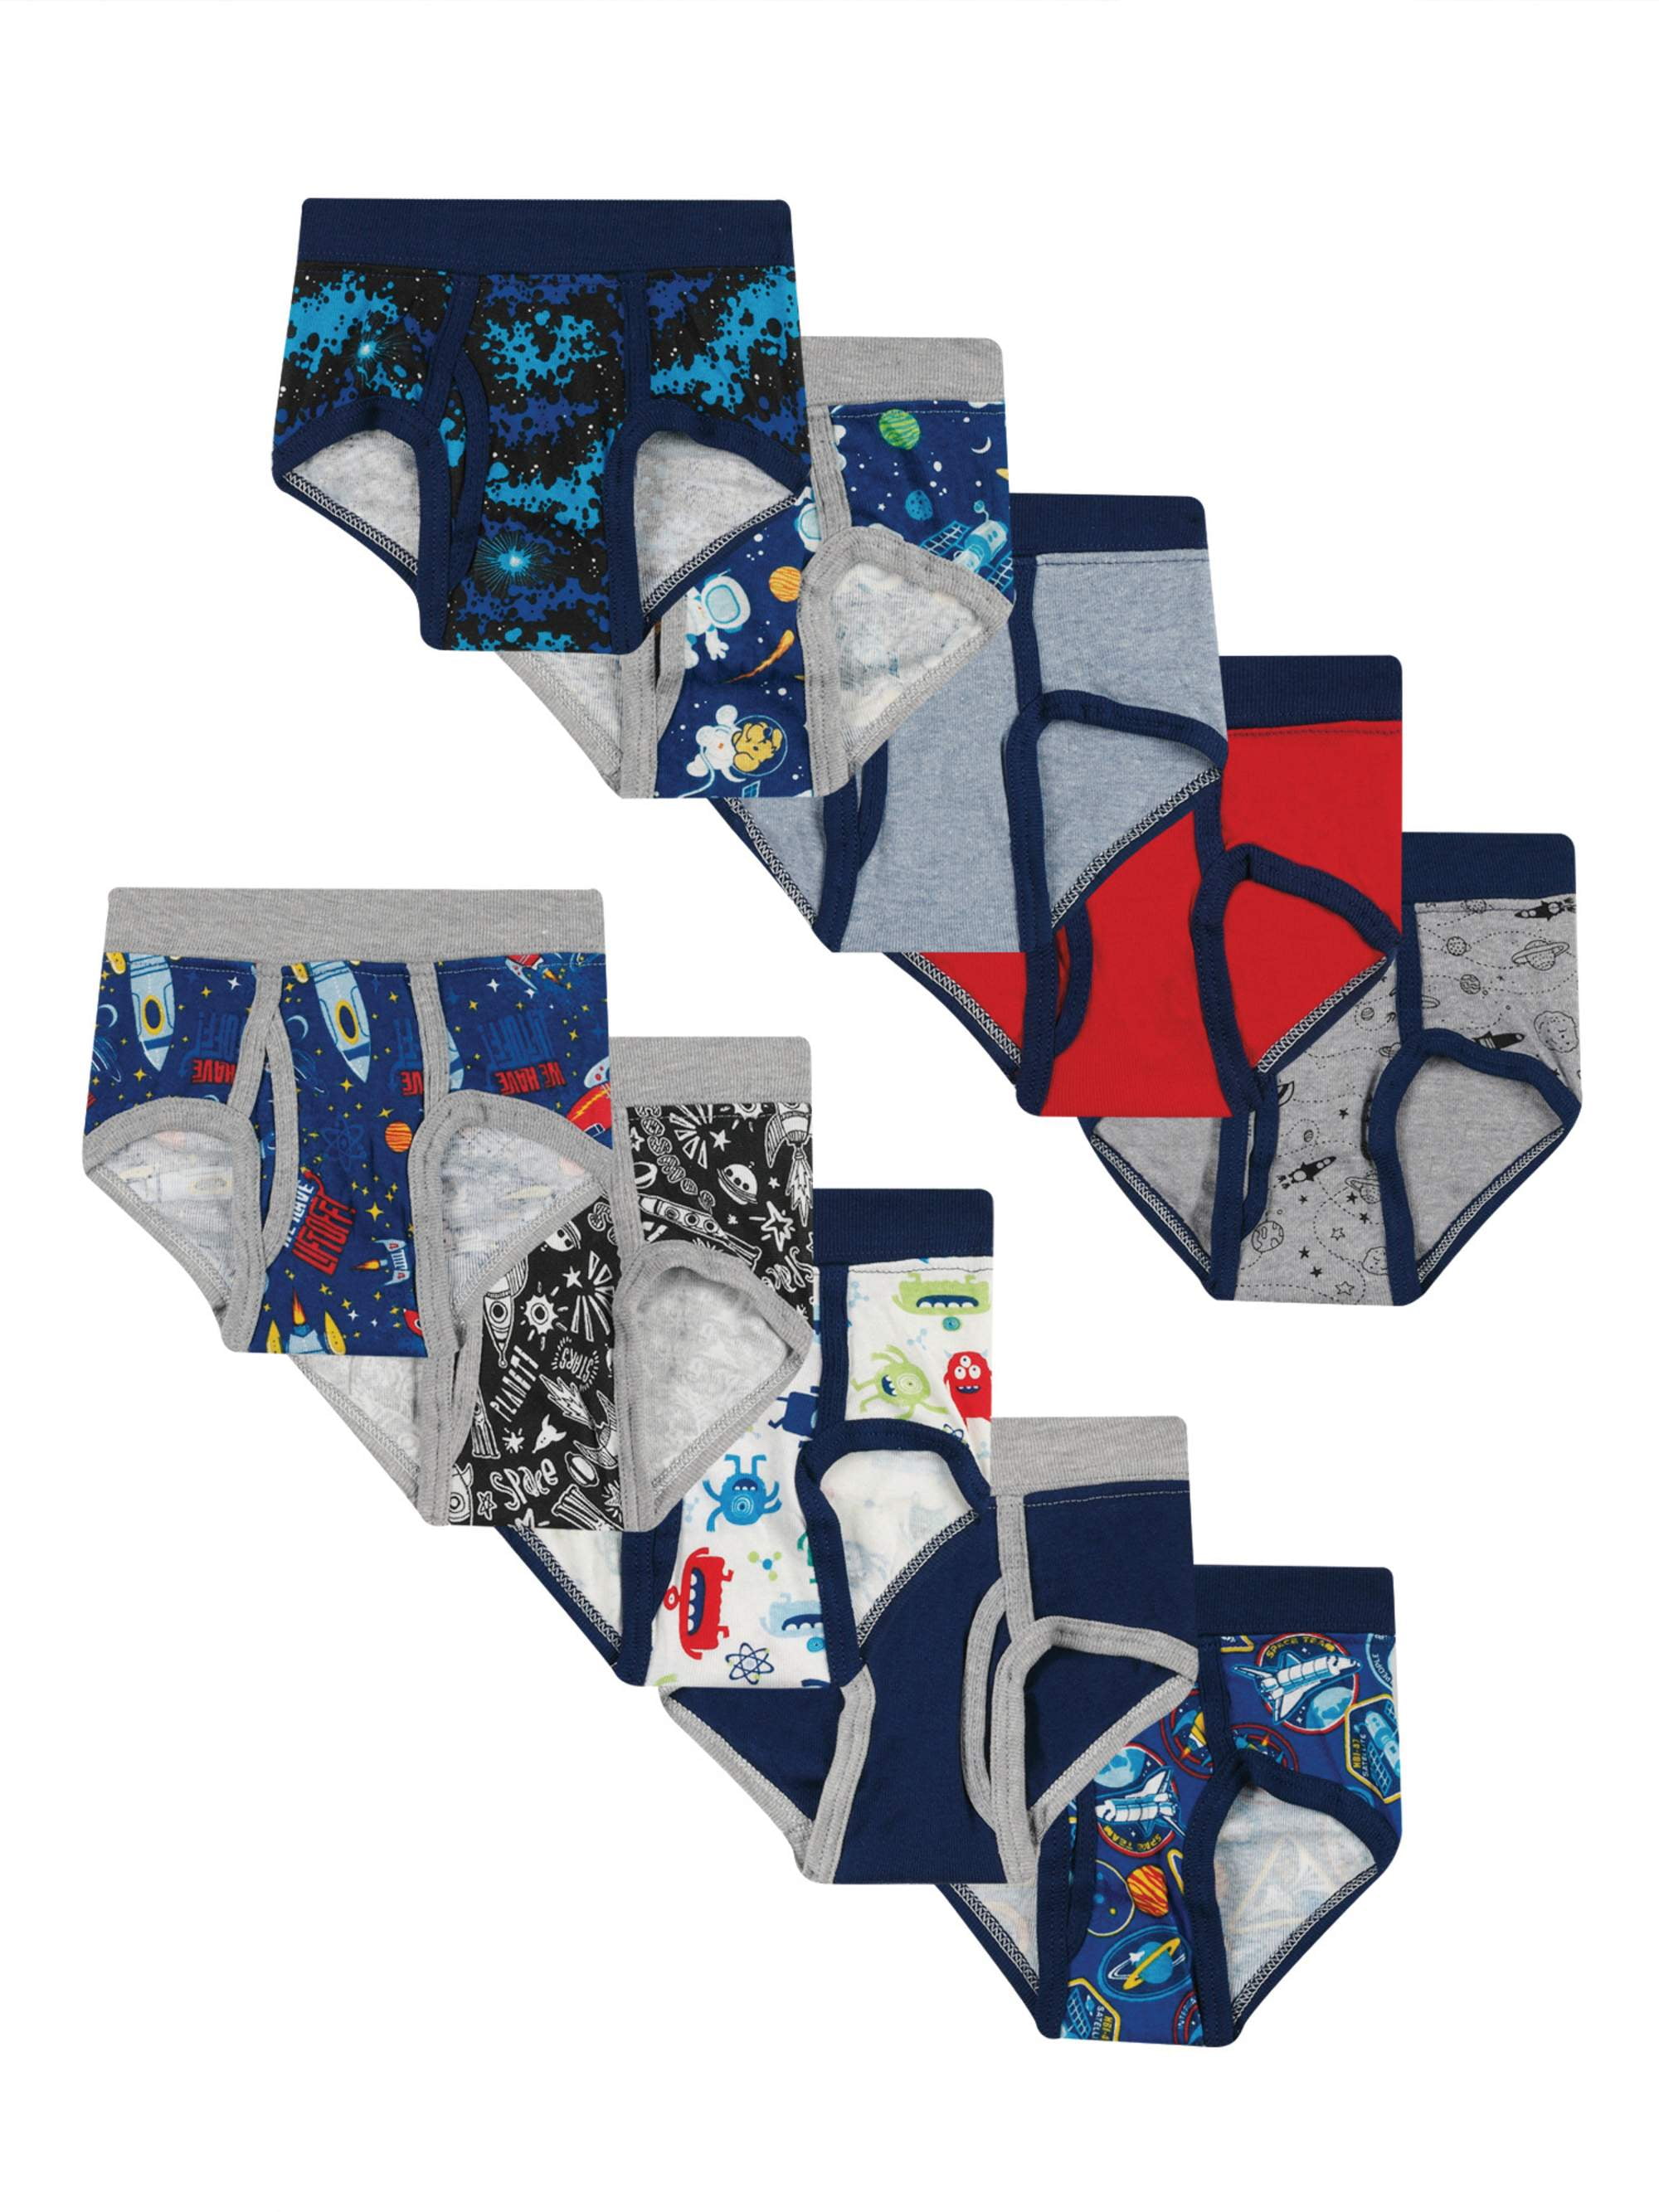 New In Package 10-Pack Toddler Boys Size 2T/3T Tagless Briefs, Hanes Pure  Comfort, Variety of Colors and Prints Auction